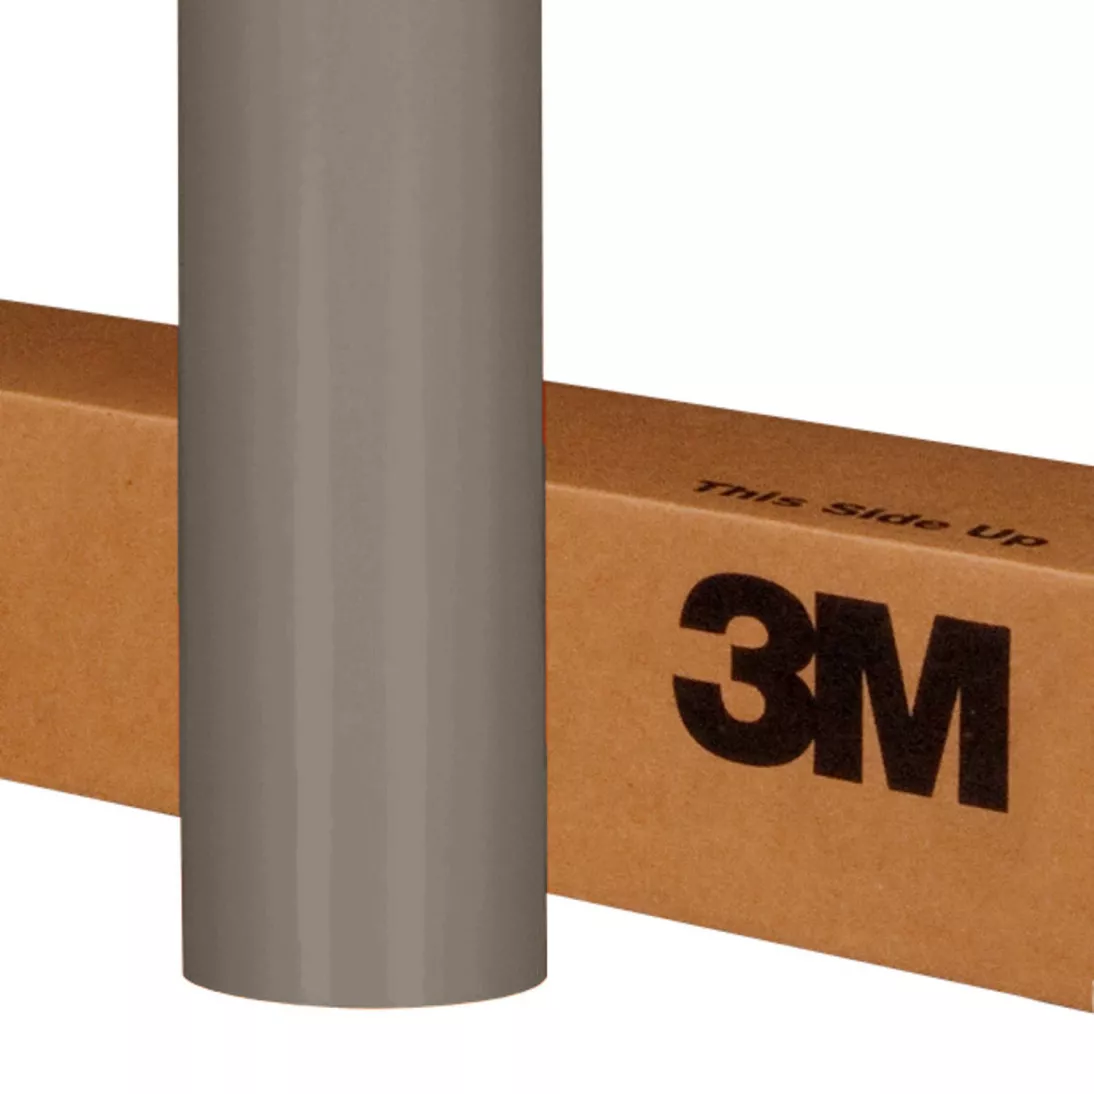 3M™ Scotchcal™ ElectroCut™ Graphic Film 7725-91, Dove Gray, 60 in x 50
yd